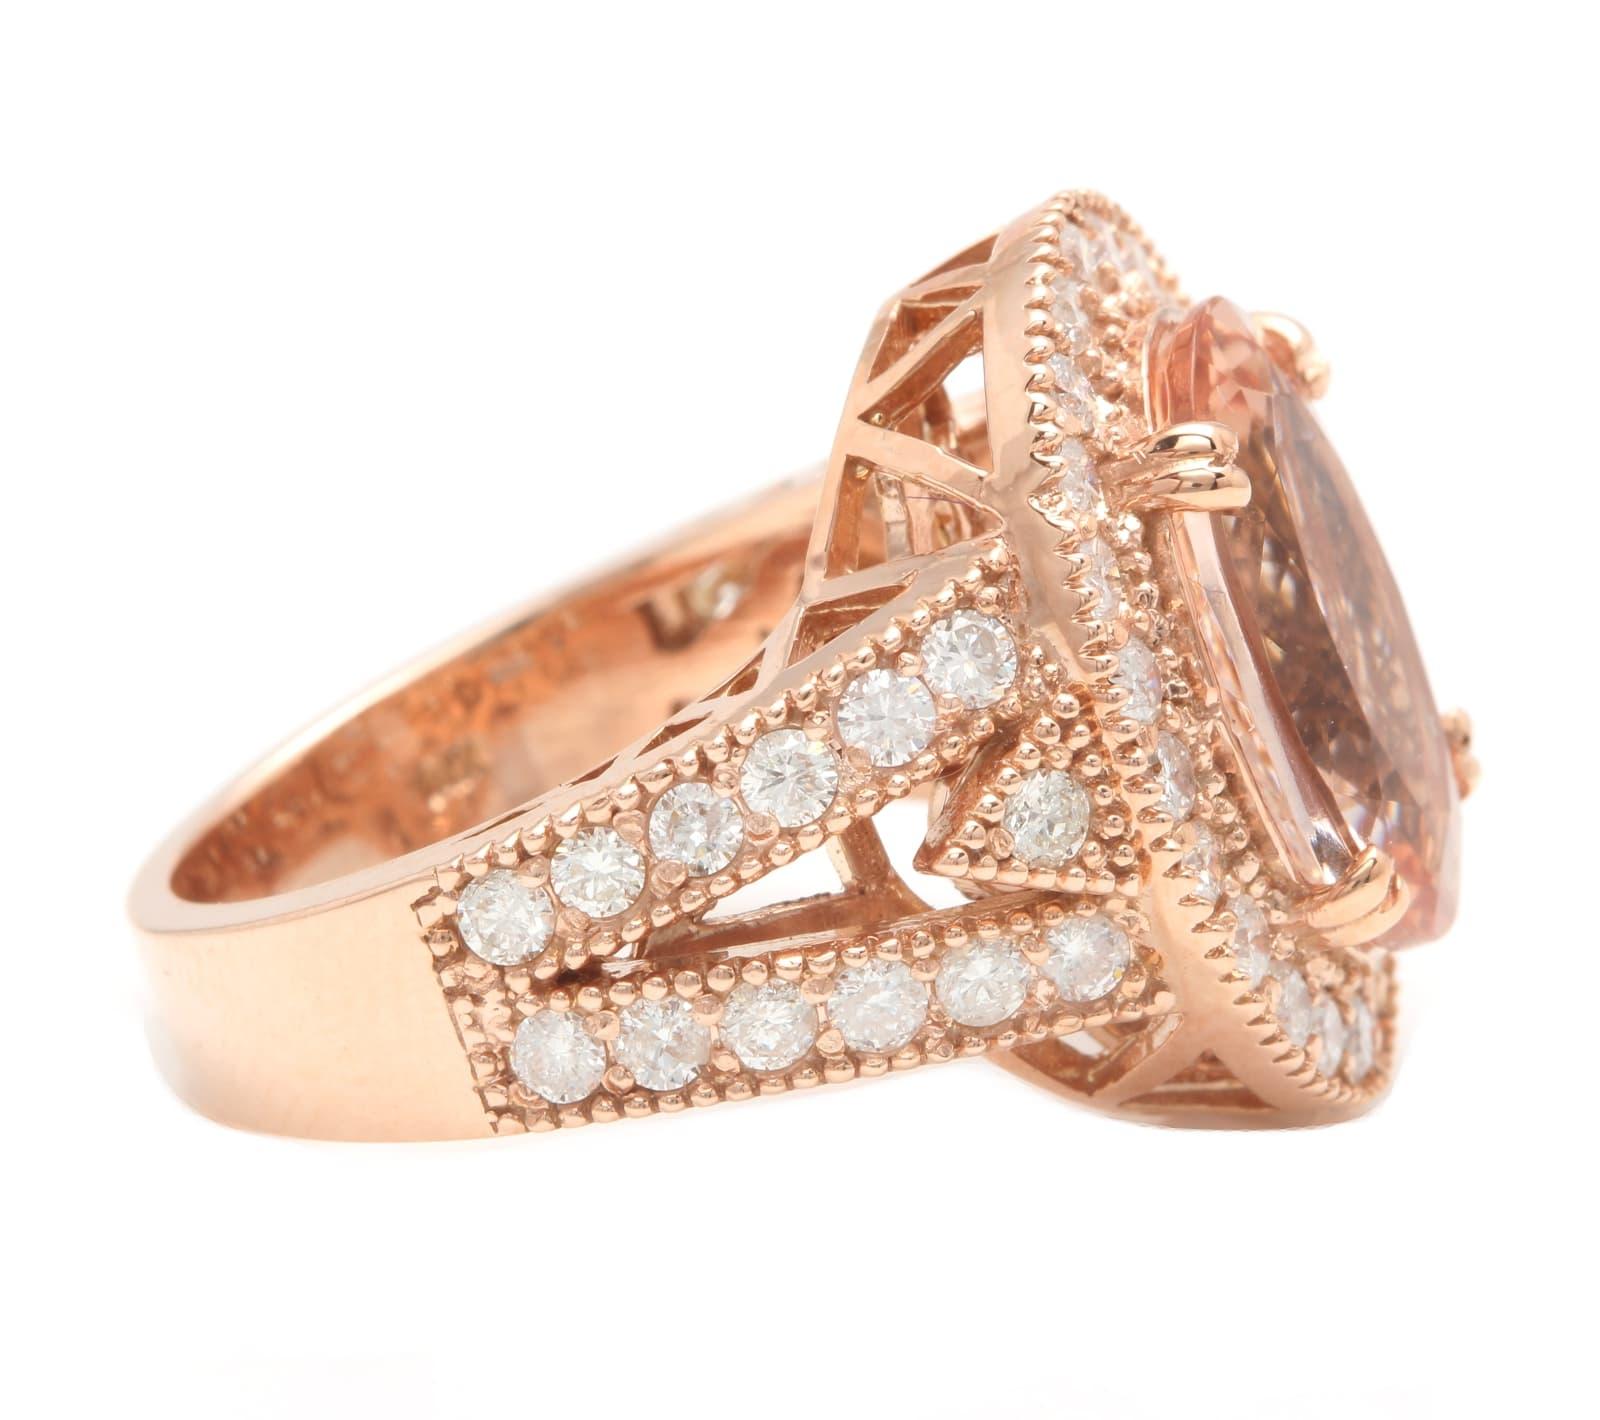 8.00 Carats Exquisite Natural Peach Morganite and Diamond 14K Solid Rose Gold Ring

Suggested Replacement Value: $7,500.00

Total Natural Morganite Weight: Approx. 6.50 Carats 

Morganite Measures: Approx. 14.00 x 10mm

Natural Round Diamonds